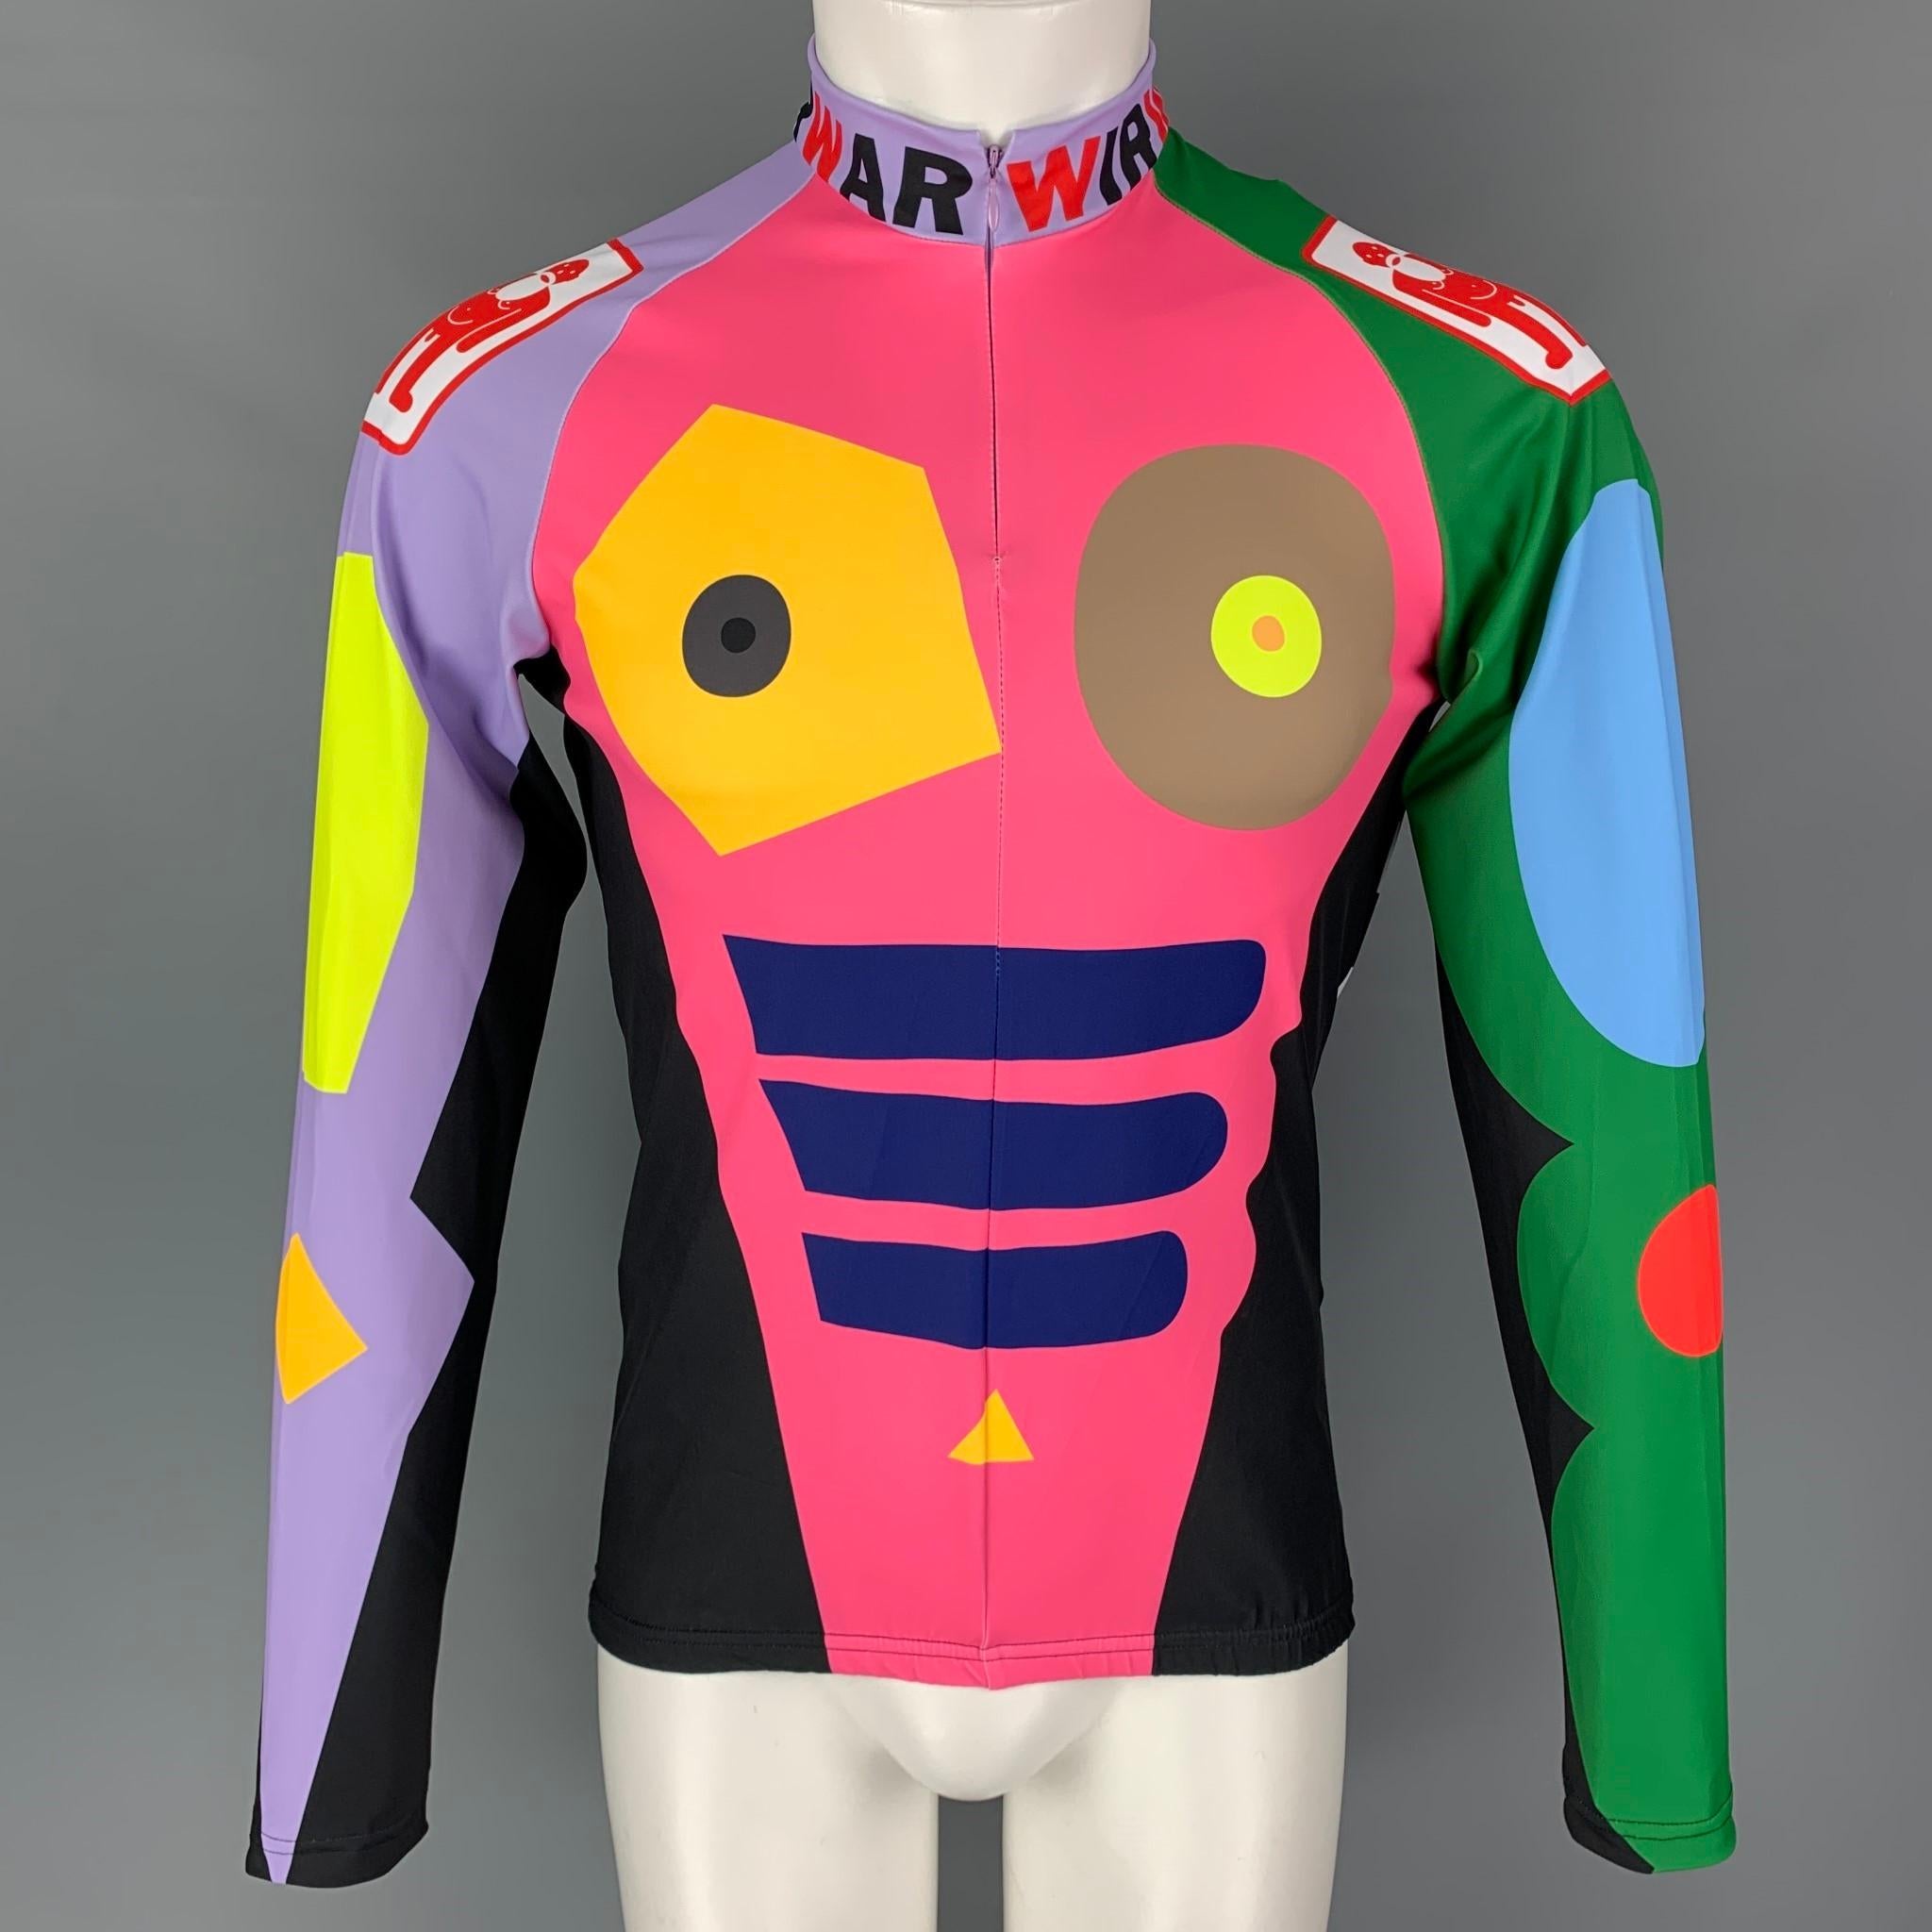 Walter Van Beirendonck Cycle Biker Jersey Pullover Top from Spring Summer 2023 WIRWAR collection. Features a quarter zip graphic print design, collar and back pockets.

Introduced as part of Walter Van Beirendonck’s W< collections during the early